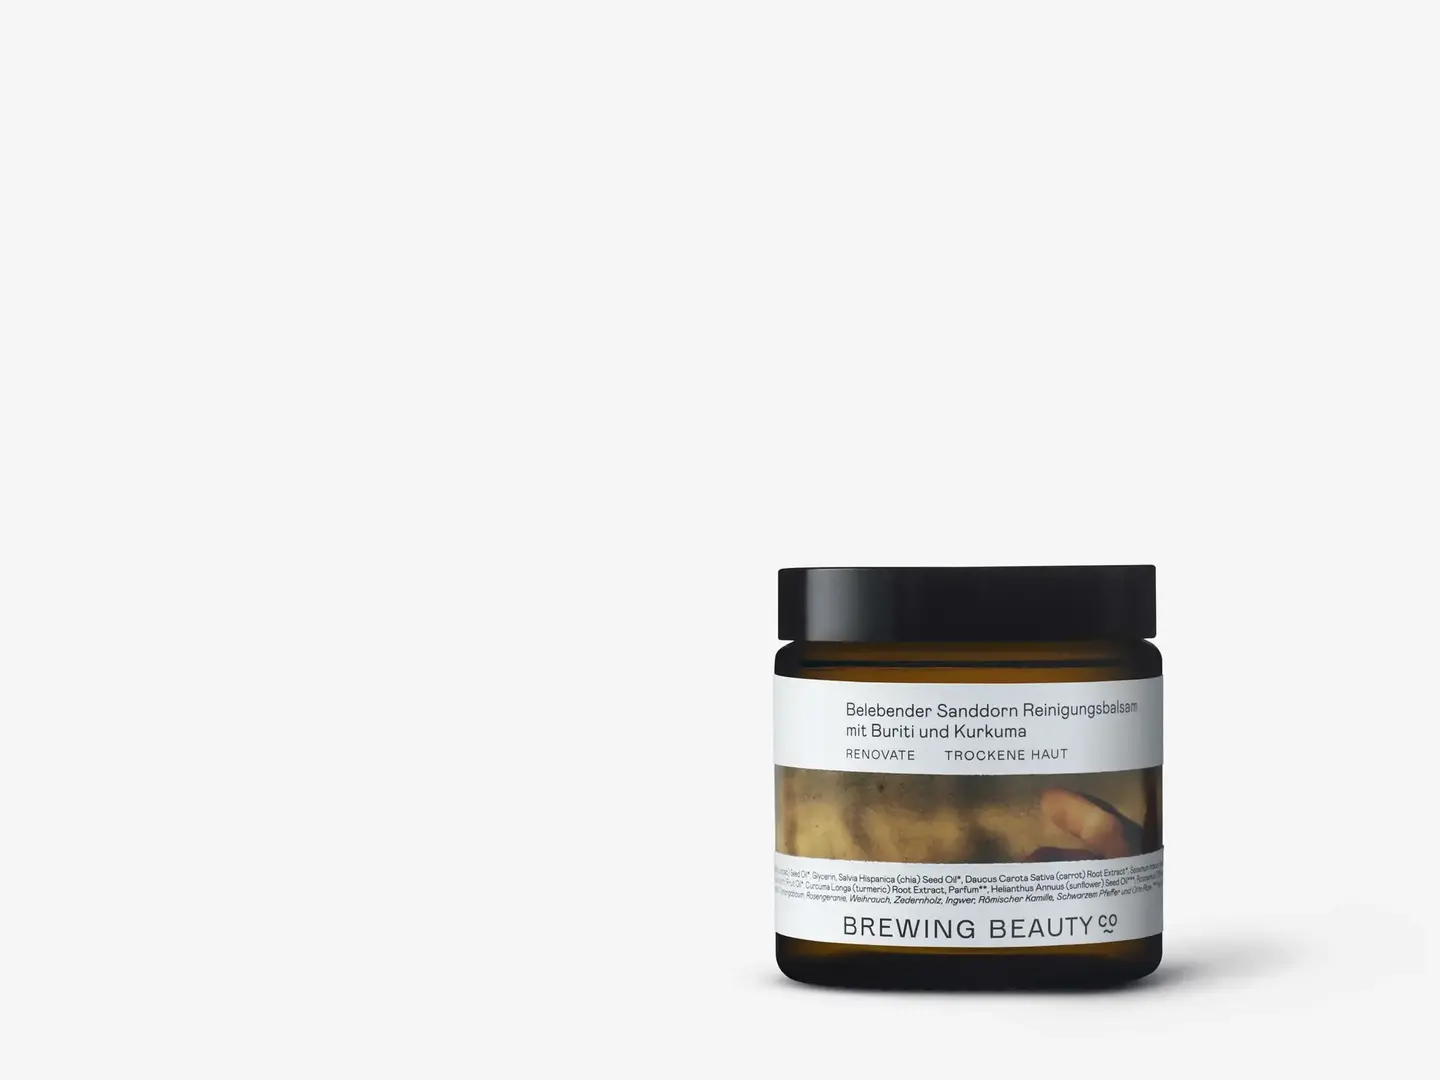 Cleanse with Replenishing Sea Buckthorn Balm Cleanser